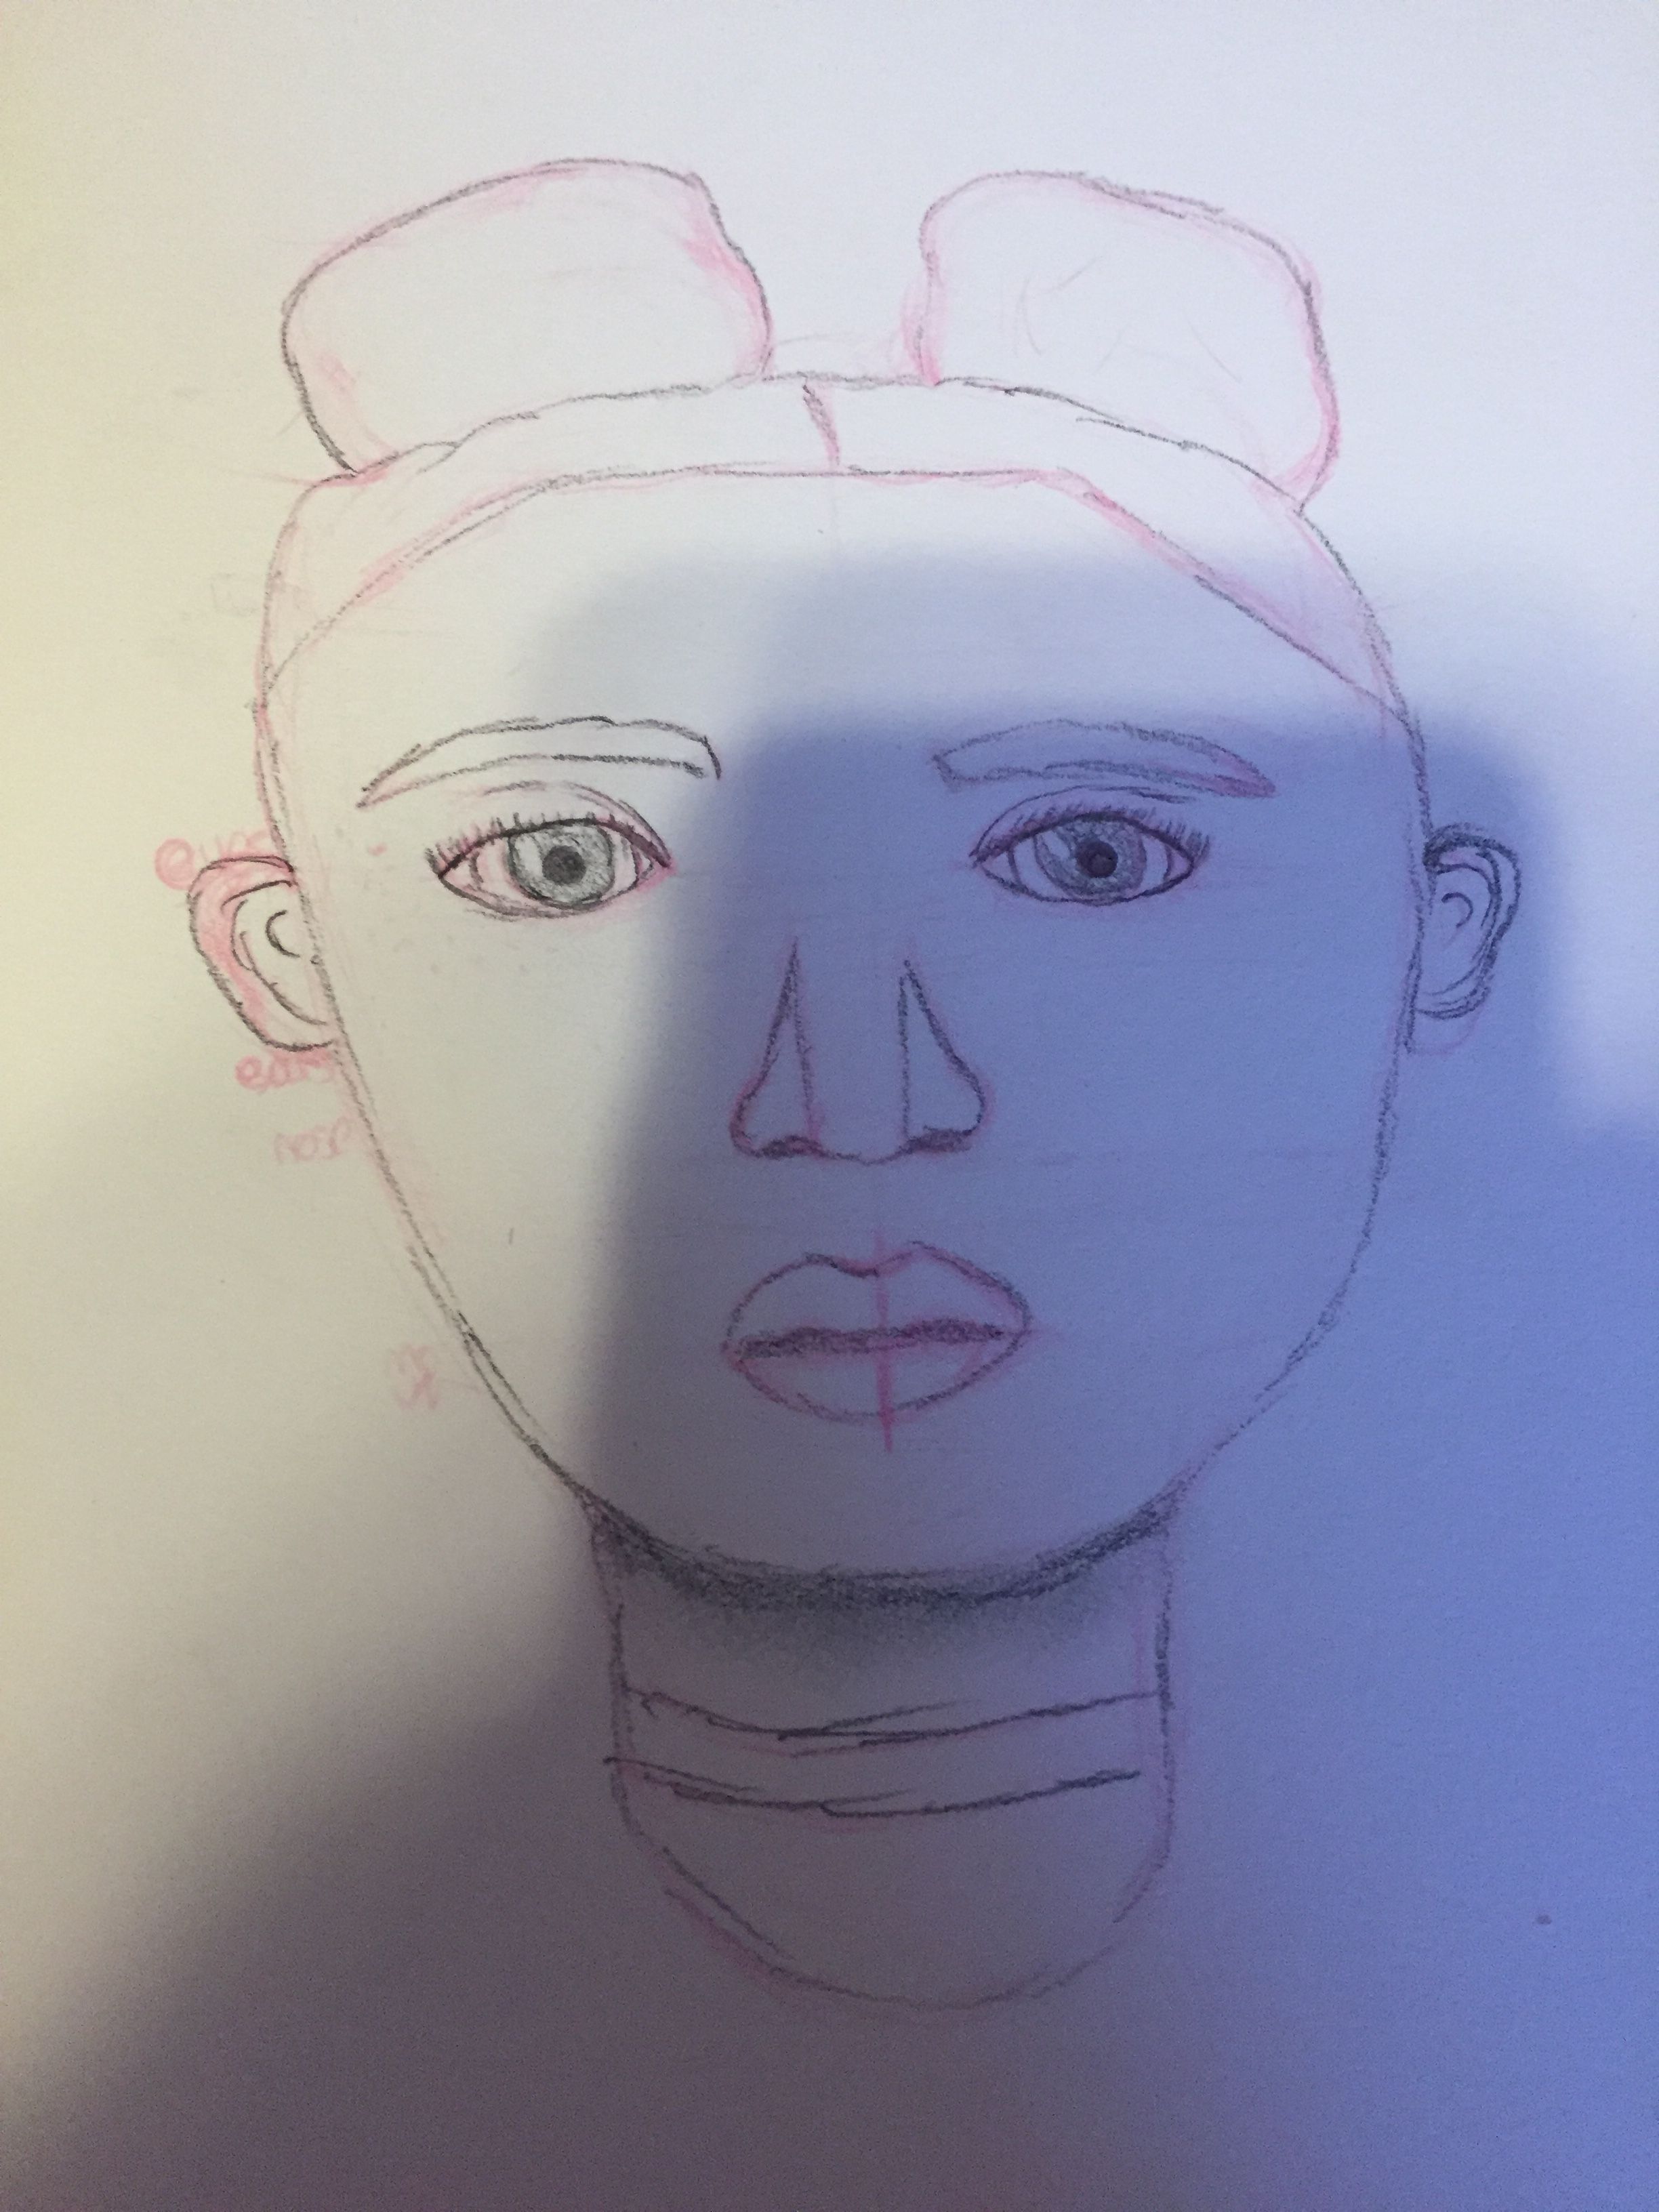 How To Draw Human Face- Beginners! | Small Online Class for Ages 13-18